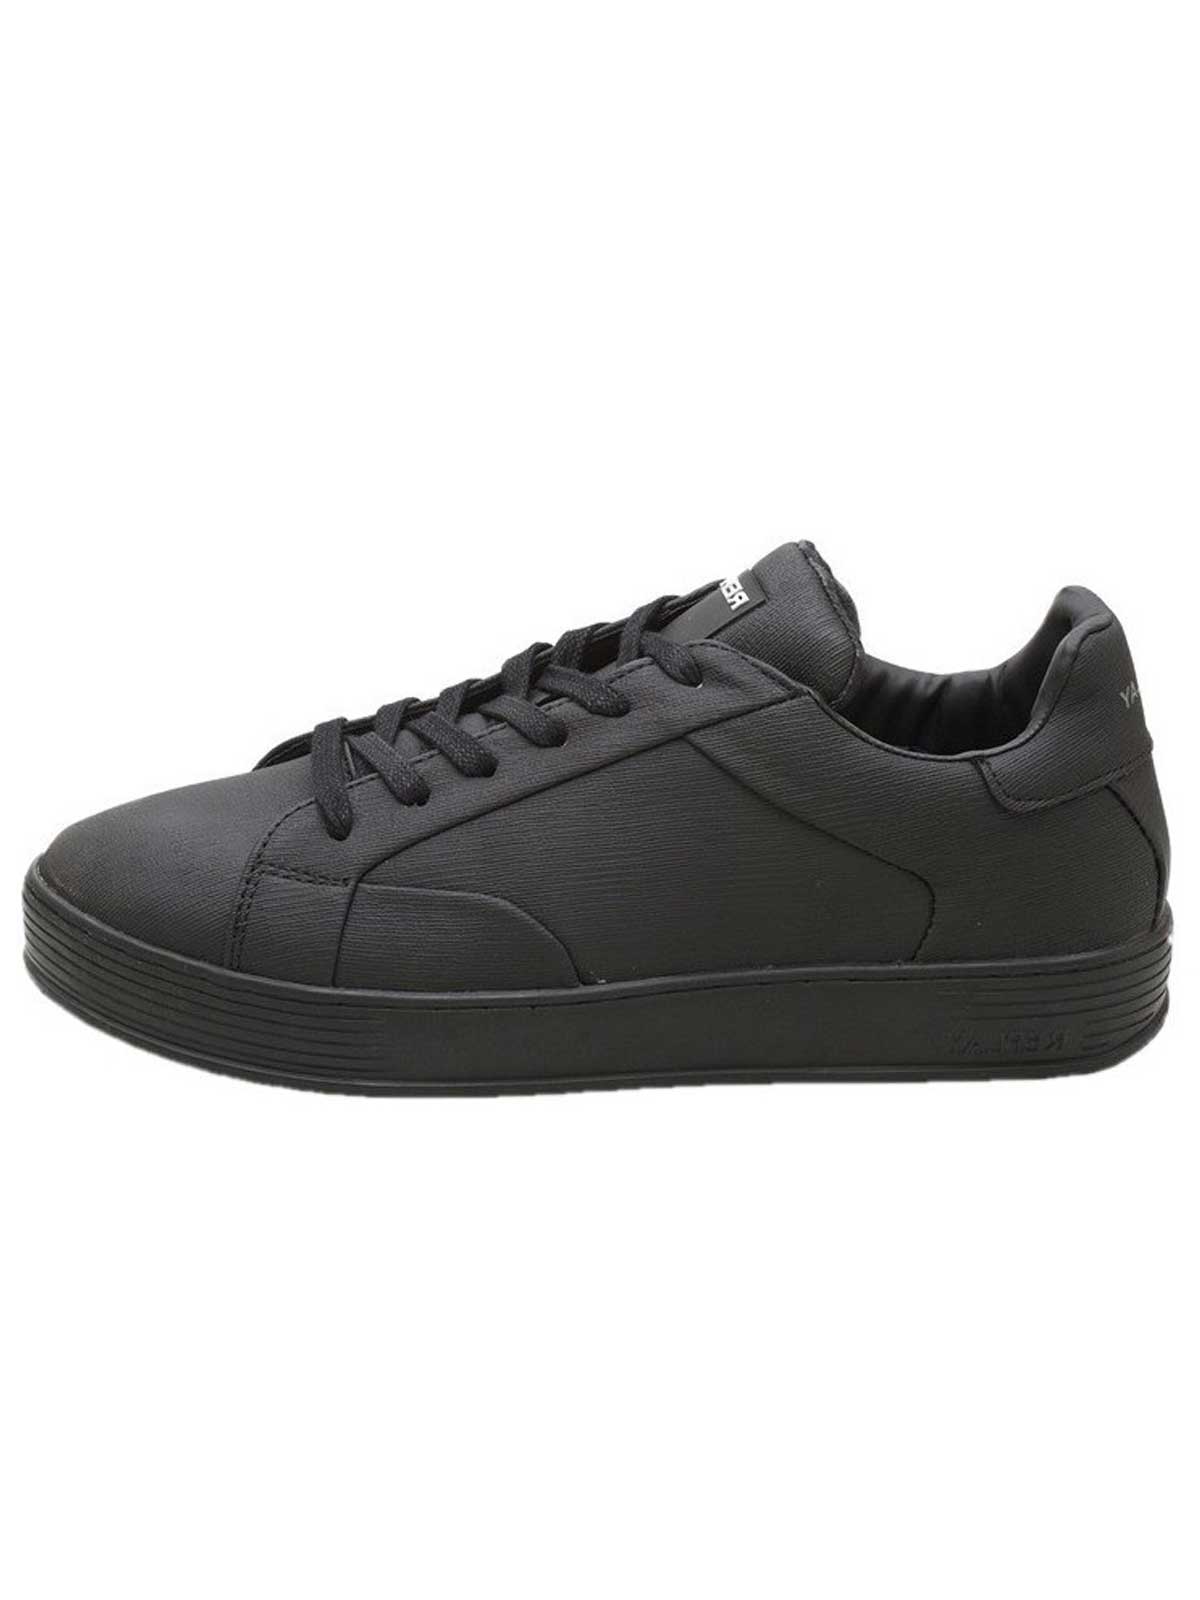   Replay | Hector Casual Sneakers |  